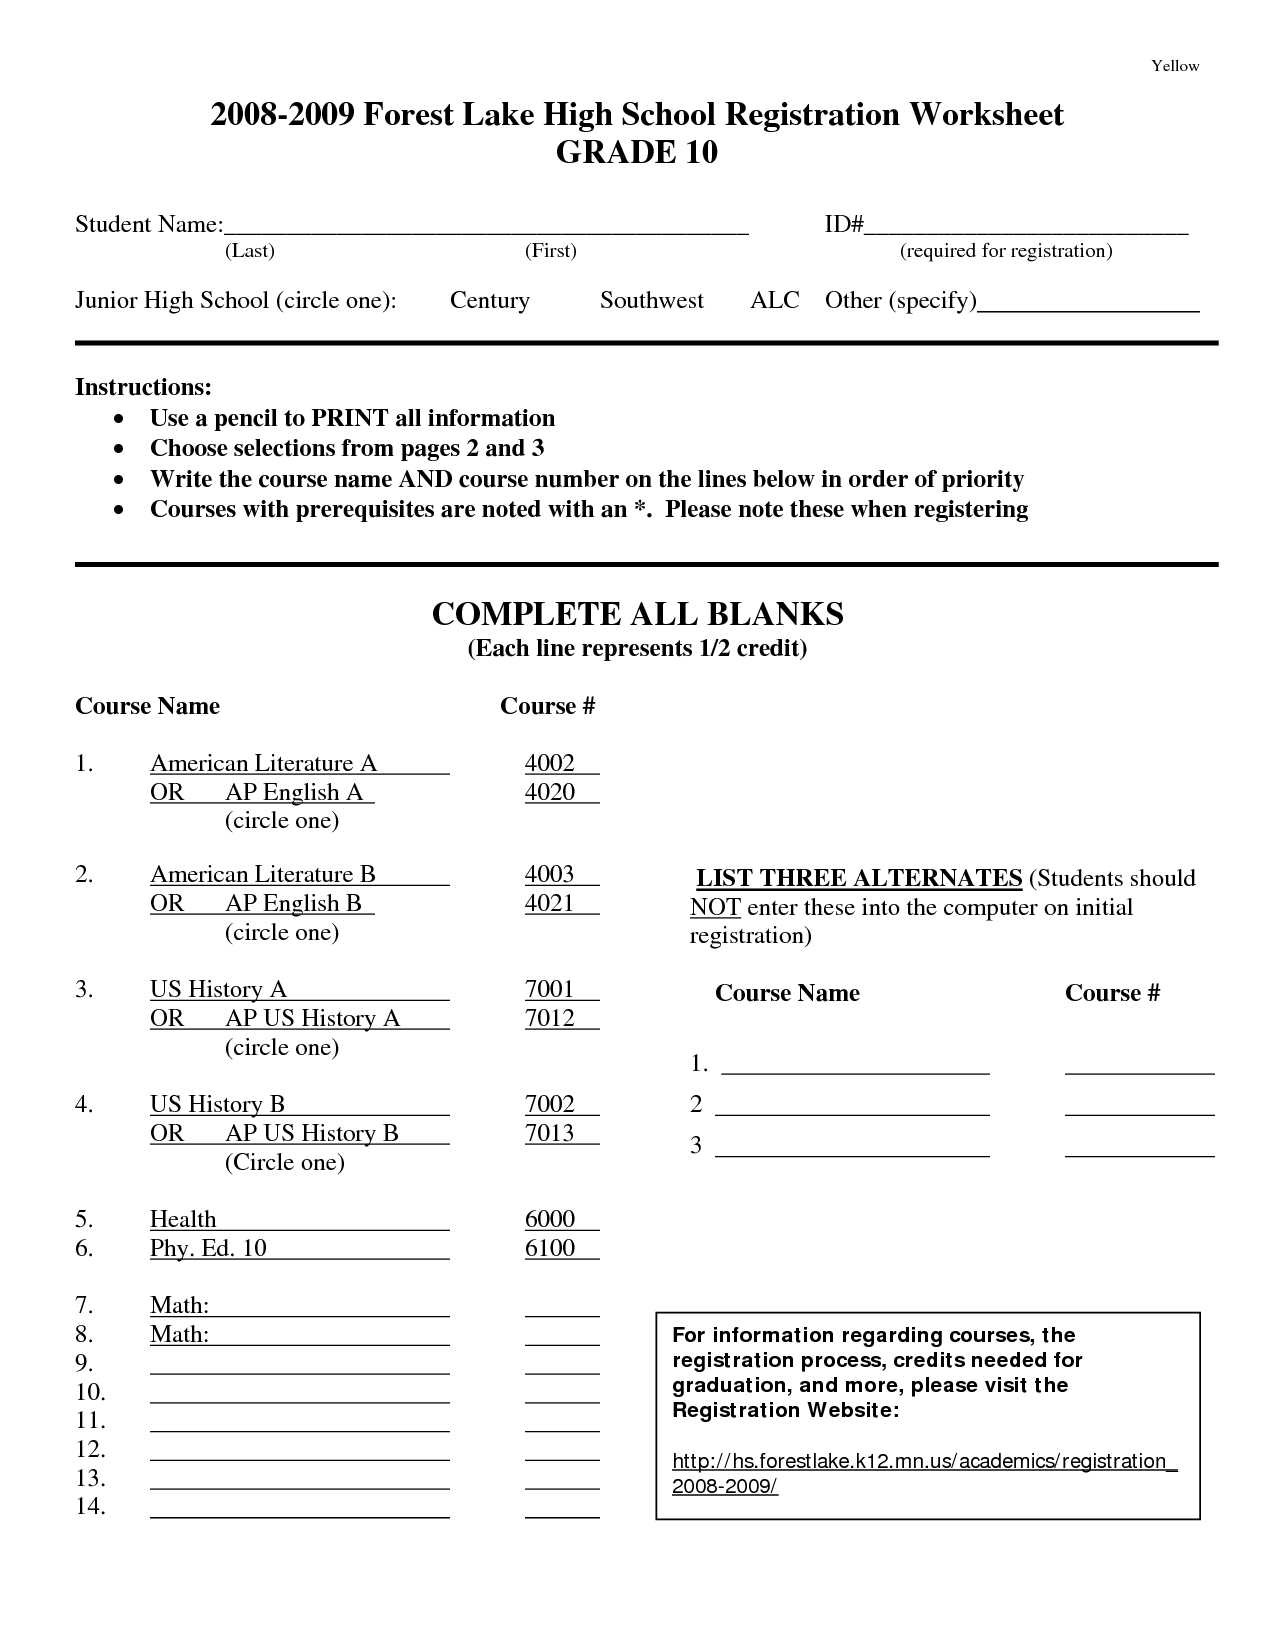 Learning Zonexpress Worksheet Answers Along with Consumer Math Worksheets for High School